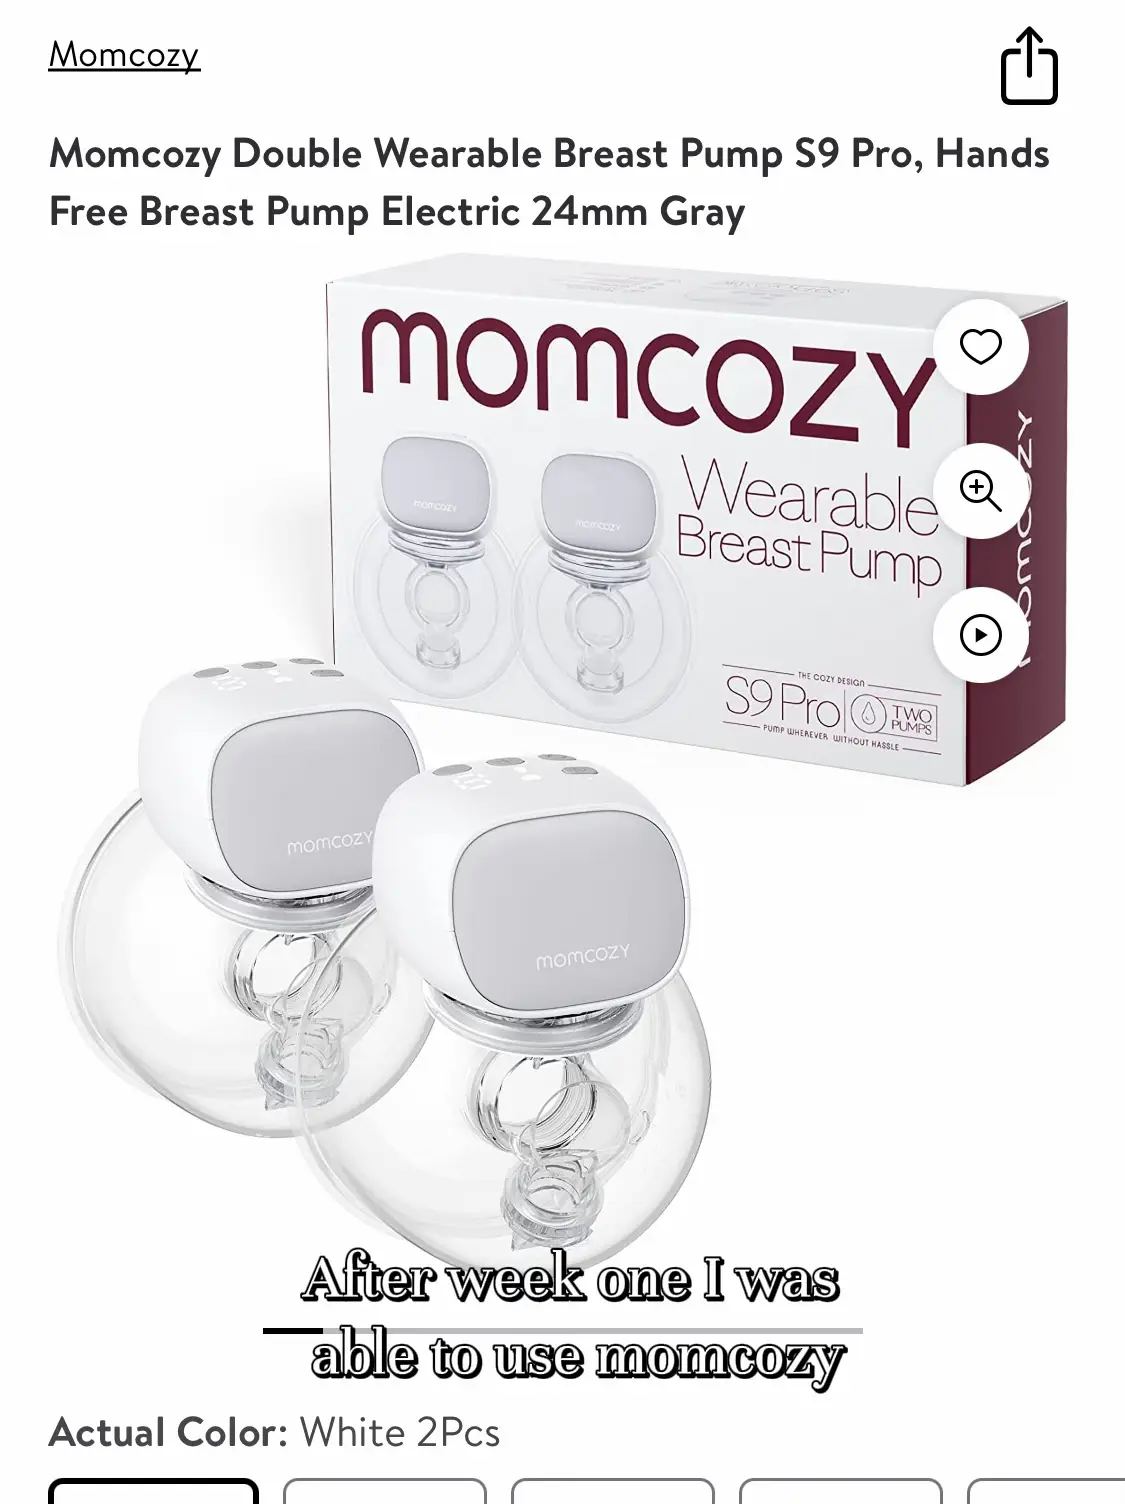 momcozy S9 ve S12 Pro — Which Breast Pump is right for you? 🤱💕 Use , mom  cozy s9 pro vs s12 pro review